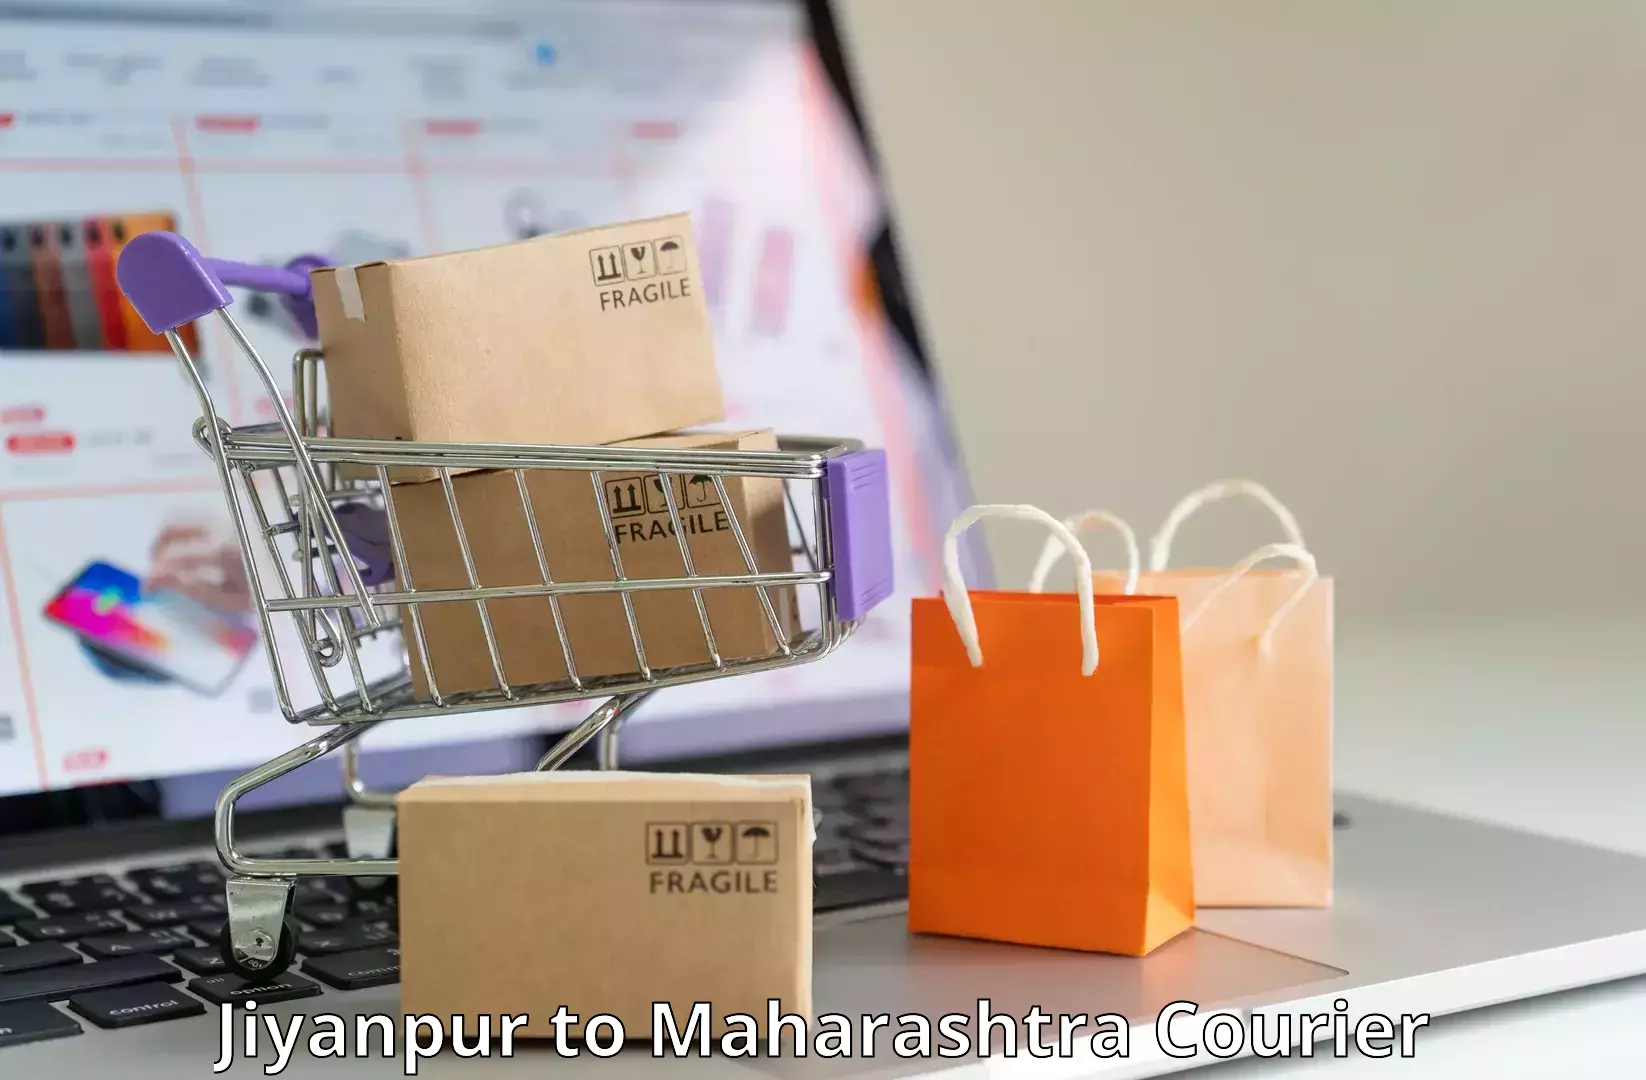 Multi-service courier options Jiyanpur to Muktainagar